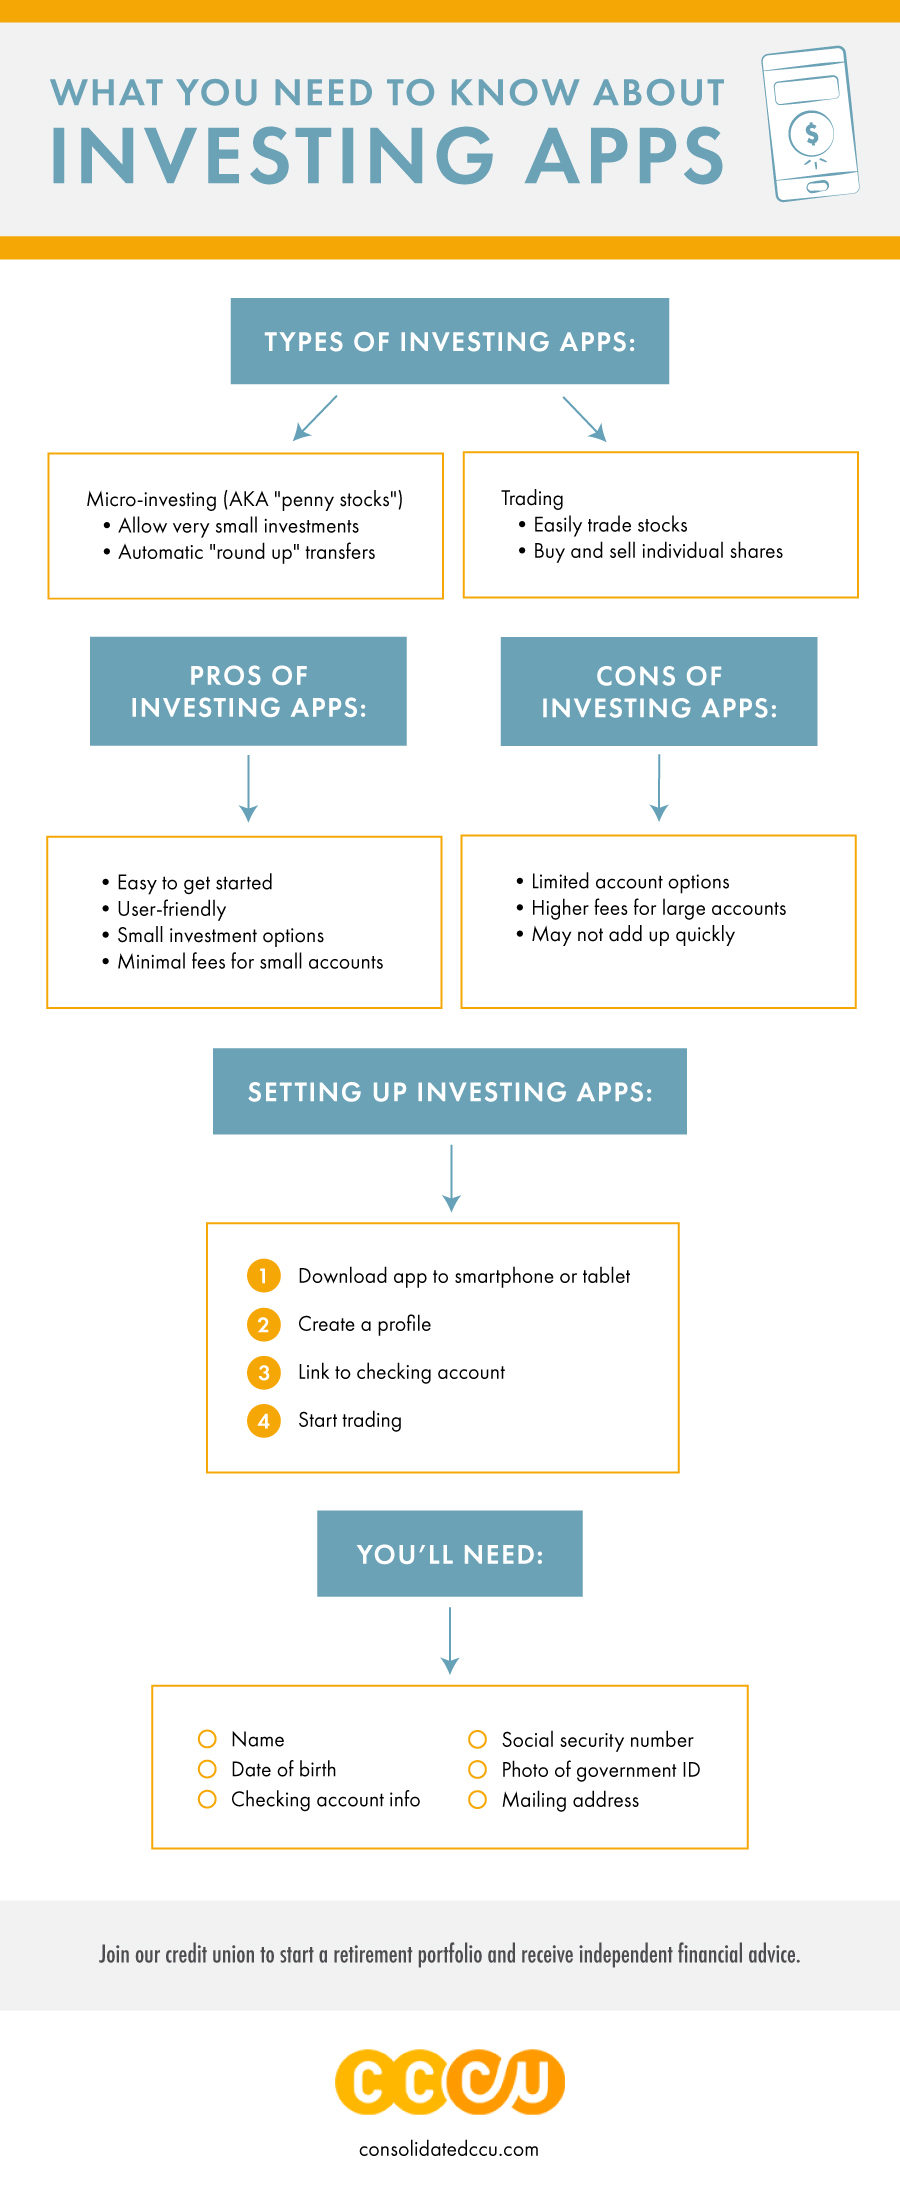 Flowchart of what you need to know about investing apps.